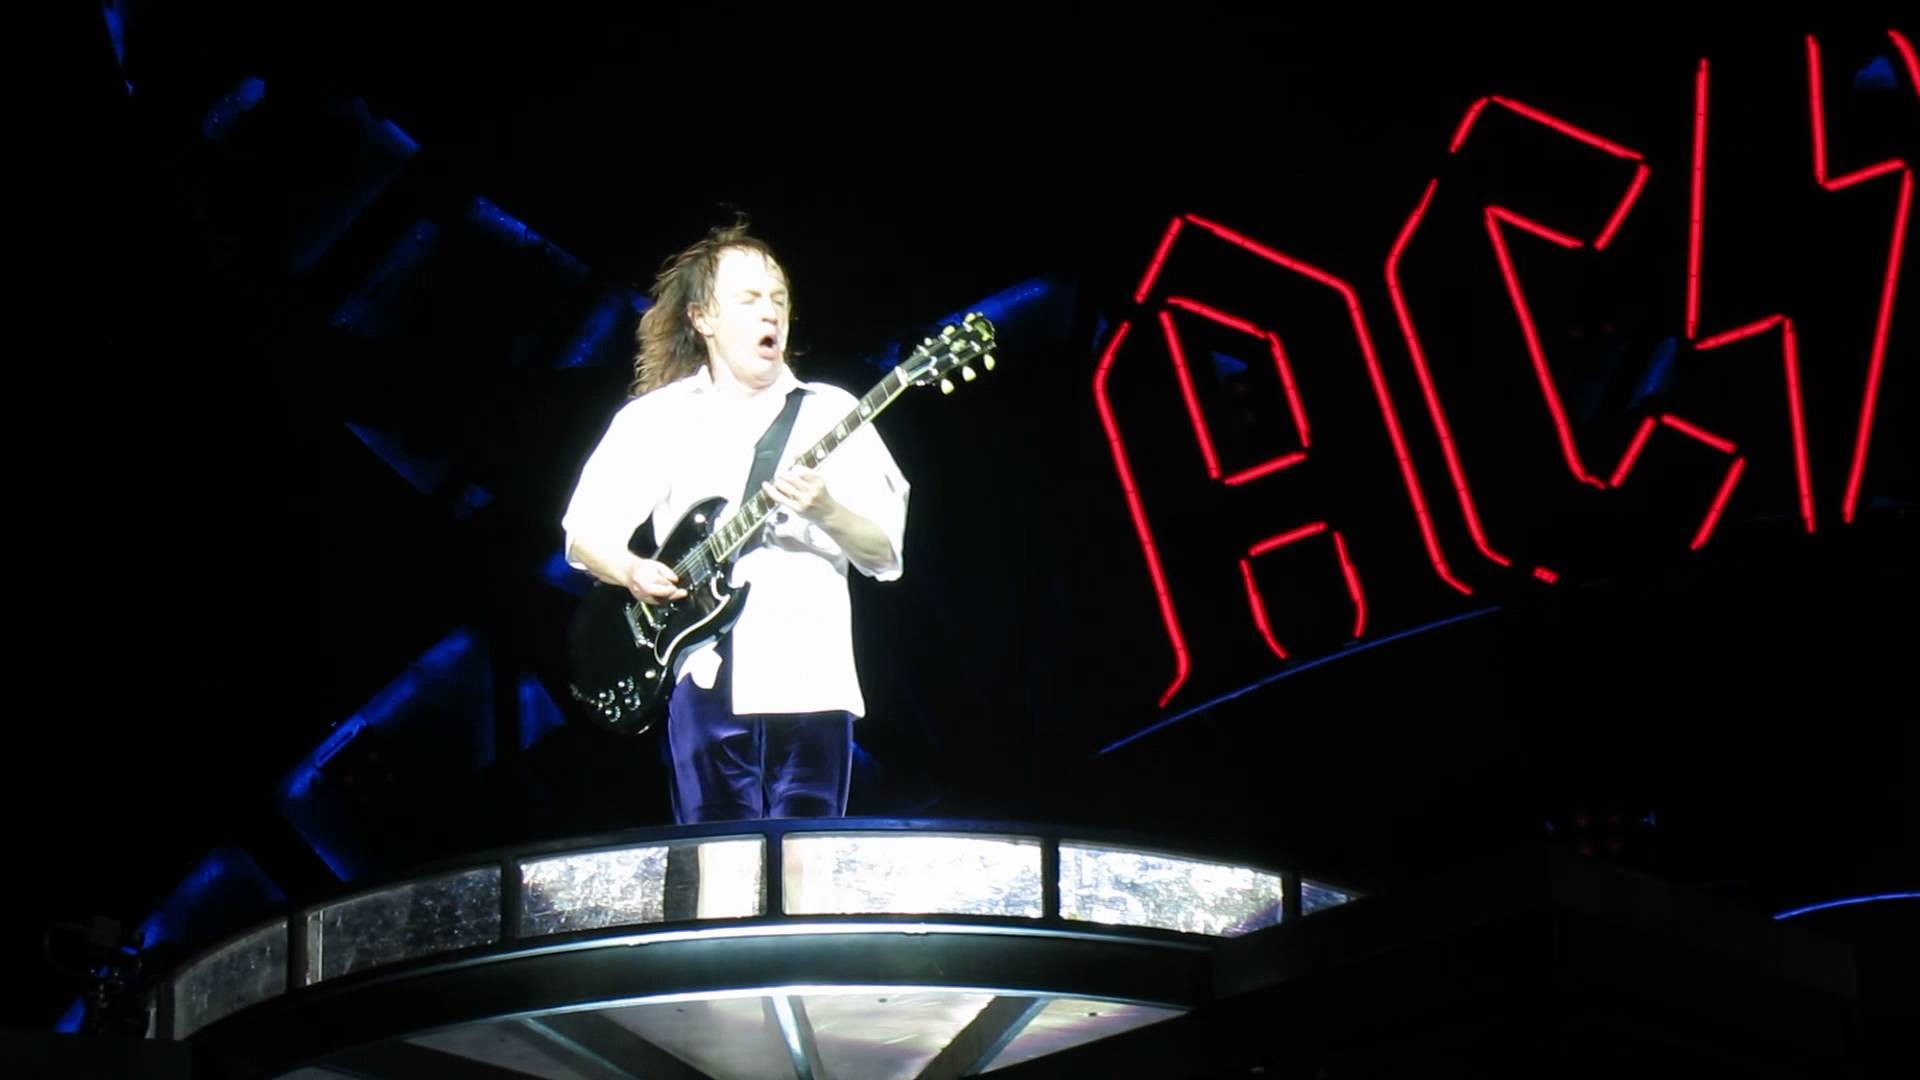 AC / DC – Let There Be Rock Angus Young nearby San Francisco, CA – 09 / 25 / 2015